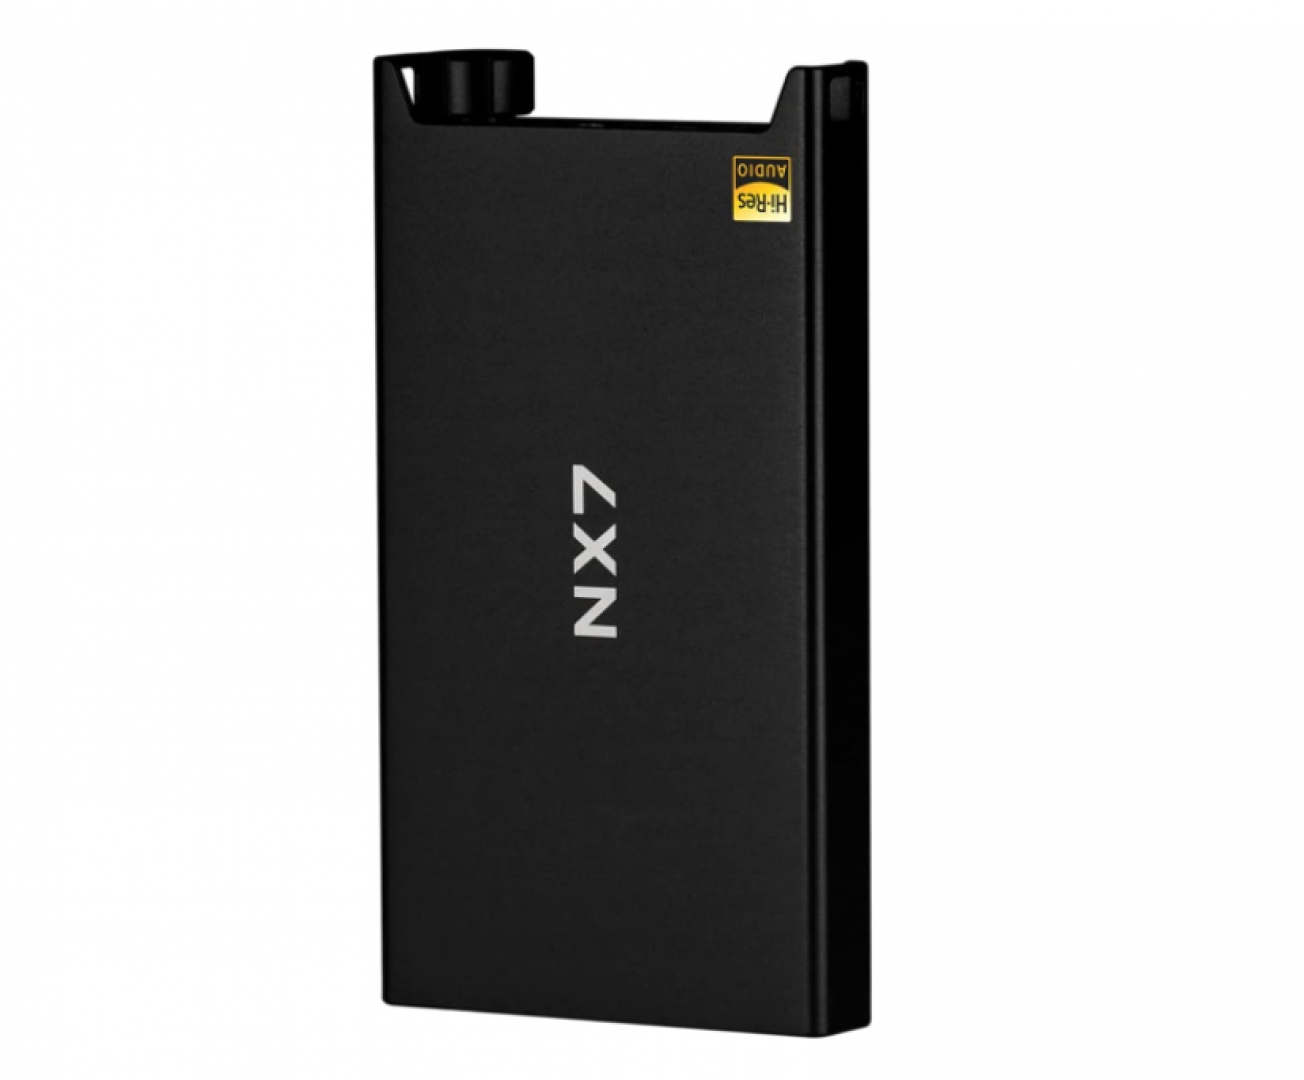 Portable HEADPHONE AMPLIFIER Topping NX7